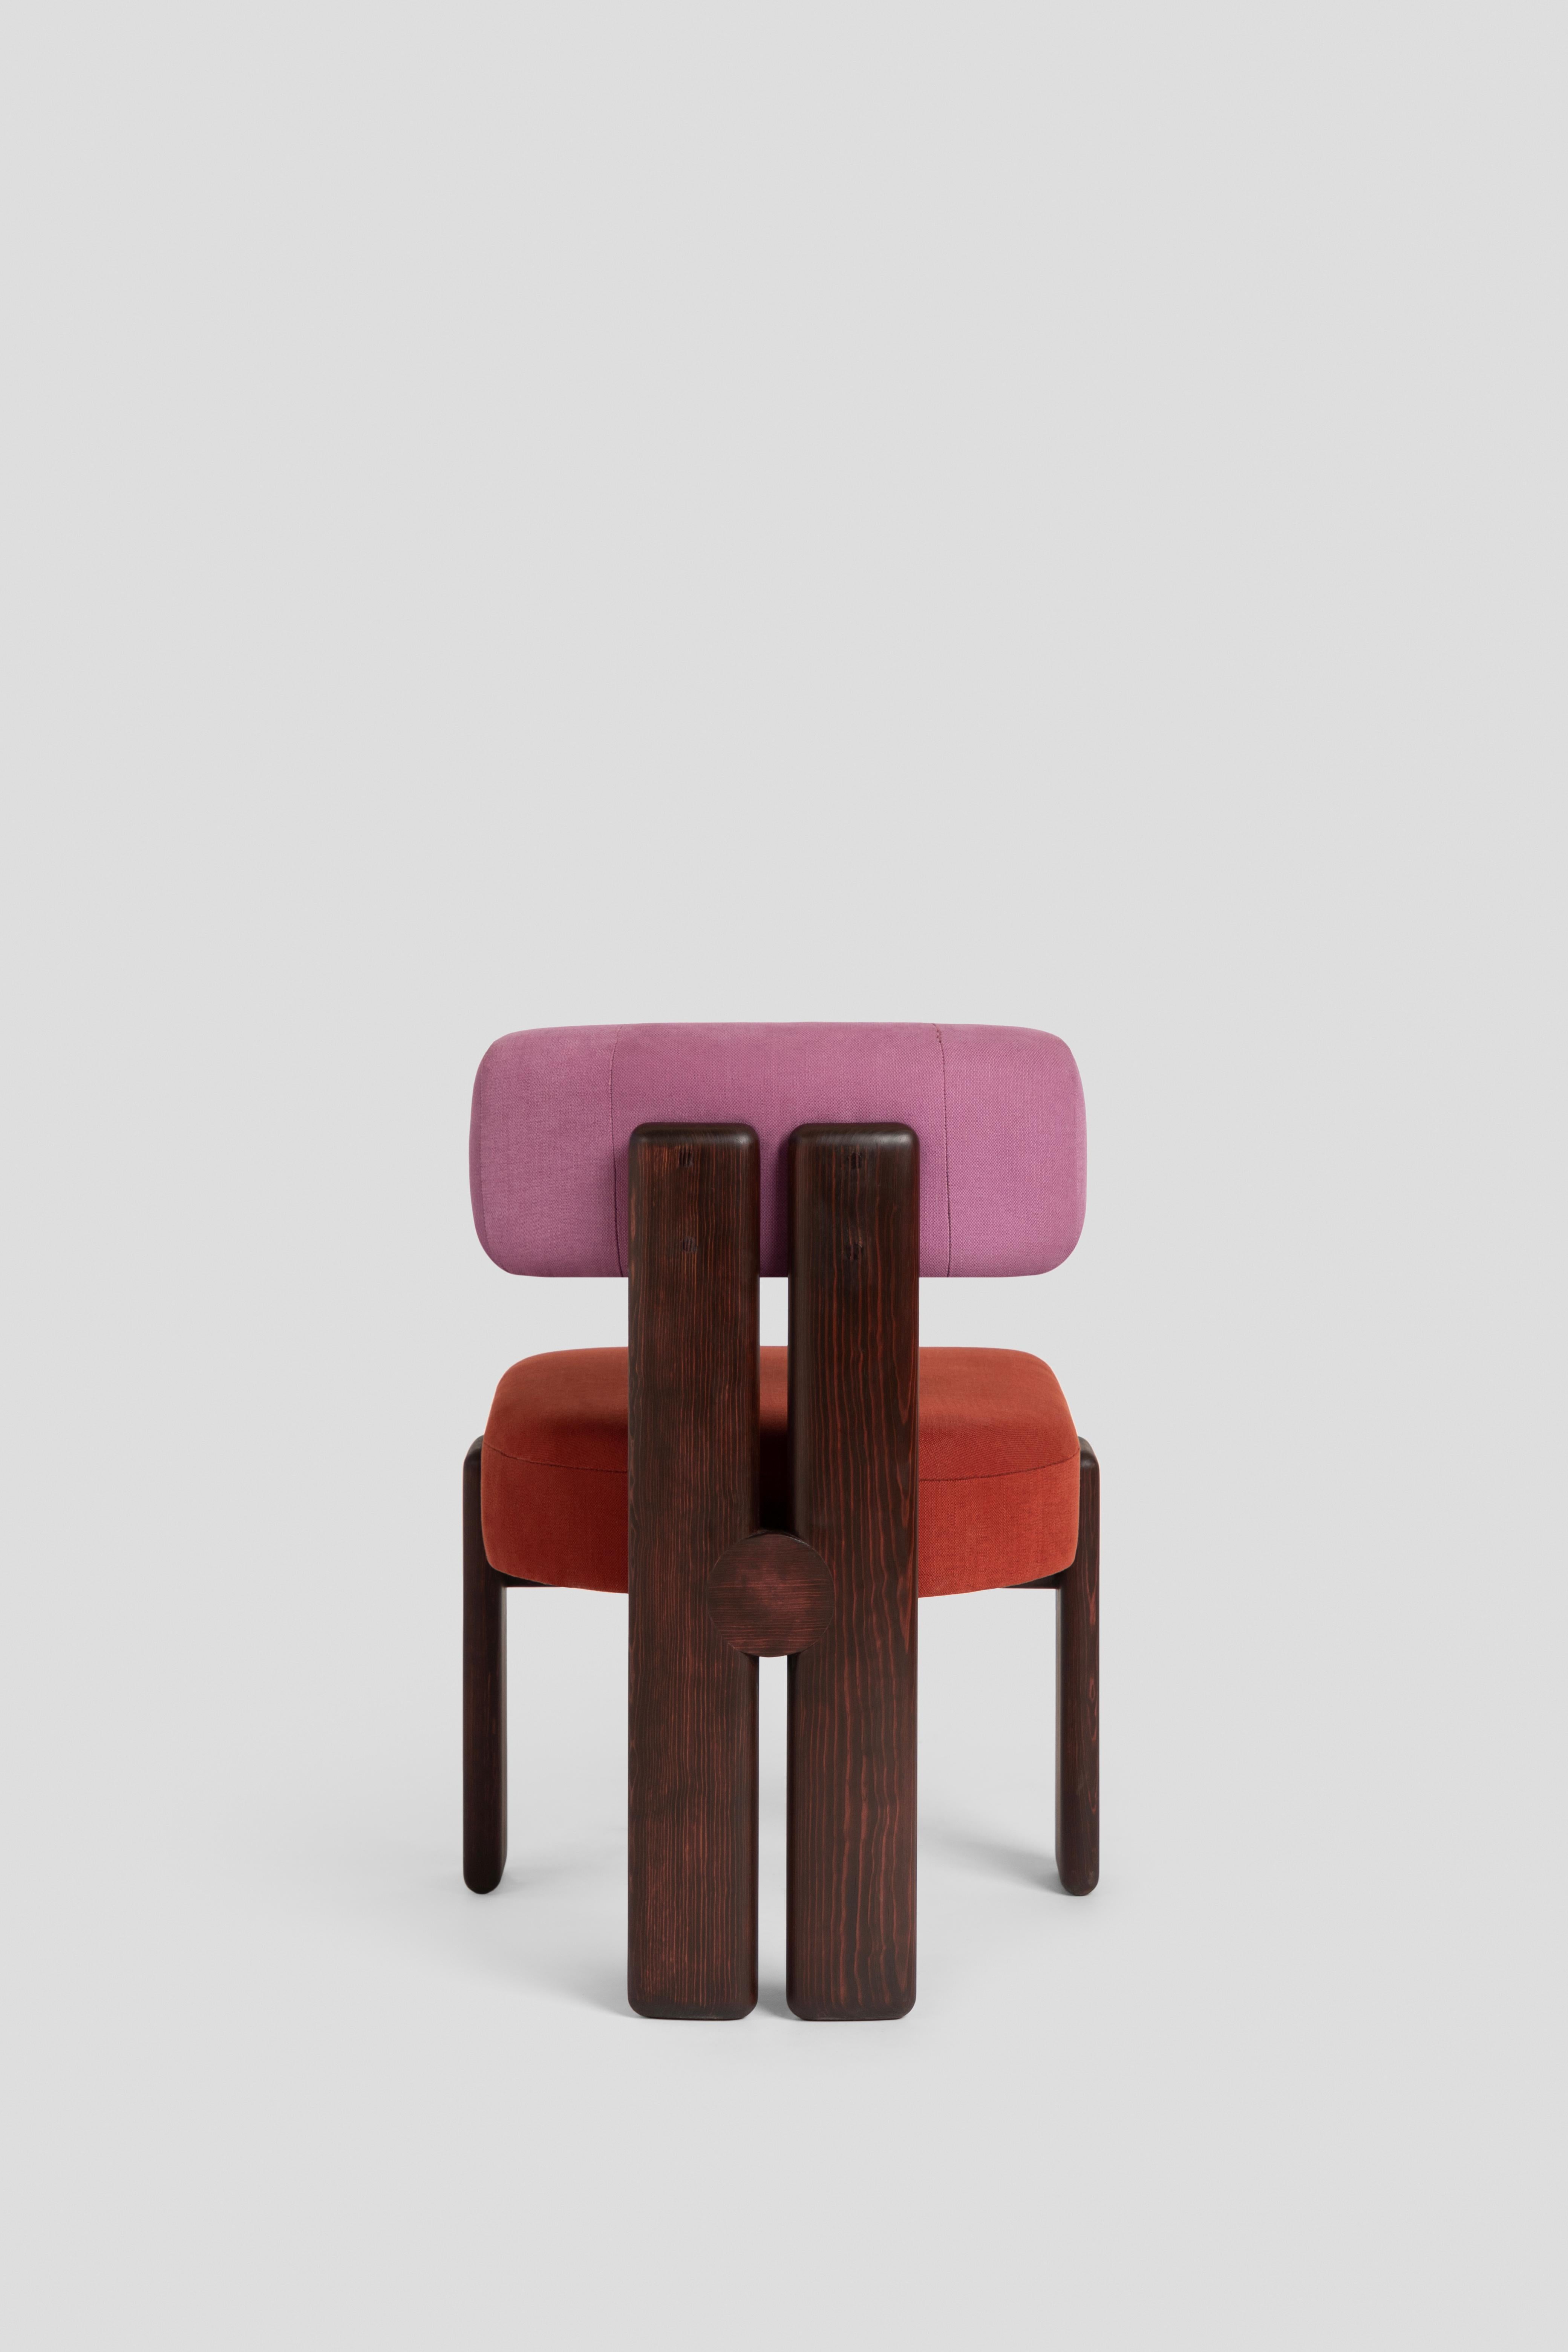 Modern De la Paz Wood Dining Chair Wood, Burgundy and Pink Upholstery  For Sale 4